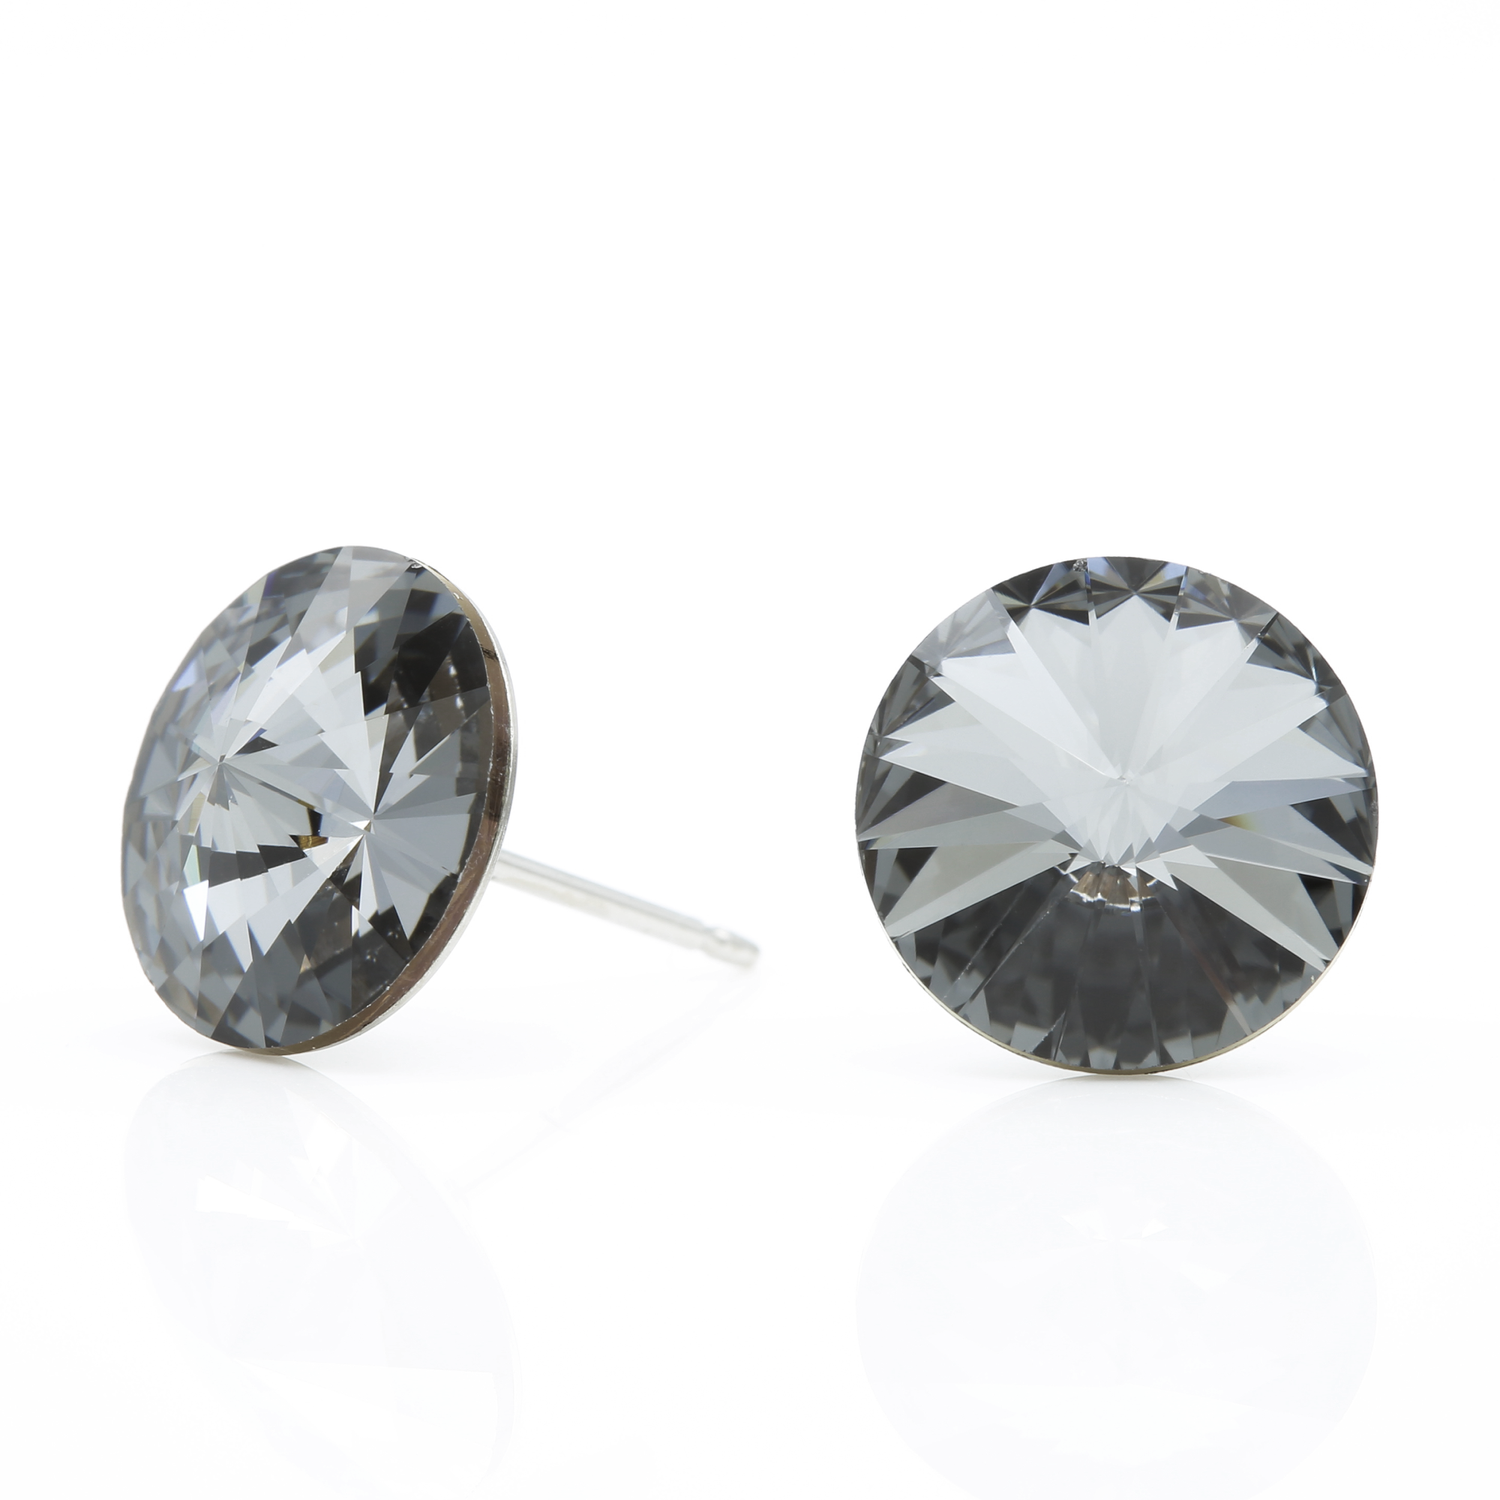 Seona - Crystal Radiance Earrings in a Round-Cut Stainless Steel Design on a White Background